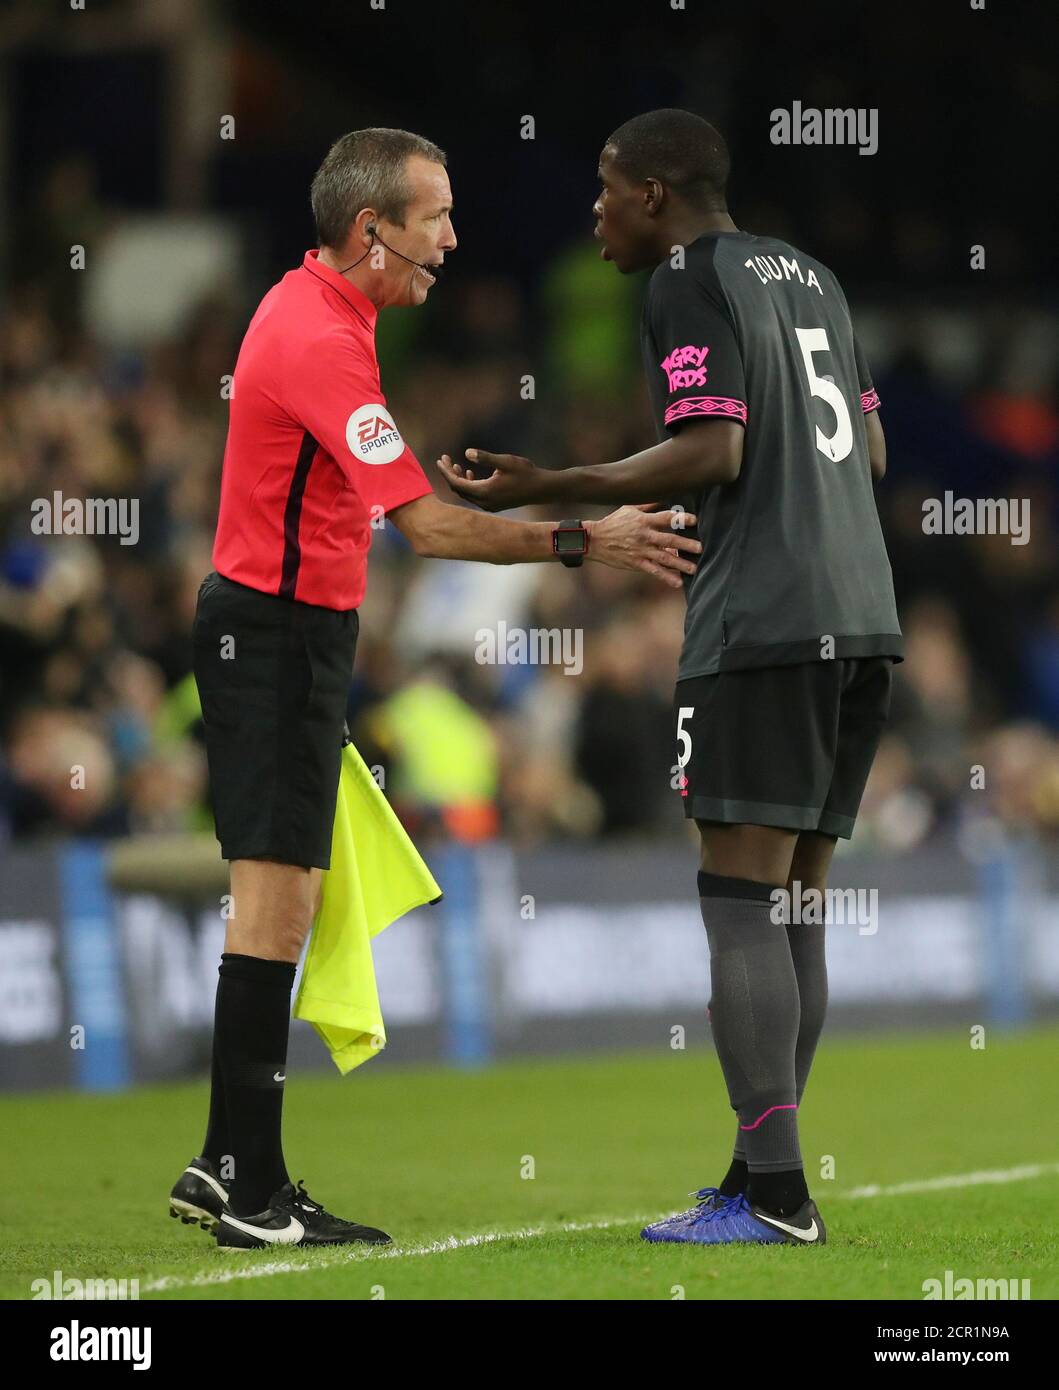 Soccer Football - Premier League - Brighton & Hove Albion v Everton - The American Express Community Stadium, Brighton, Britain - December 29, 2018  Everton's Kurt Zouma protests with the match official after Brighton's Jurgen Locadia scores their first goal             Action Images via Reuters/Peter Cziborra  EDITORIAL USE ONLY. No use with unauthorized audio, video, data, fixture lists, club/league logos or 'live' services. Online in-match use limited to 75 images, no video emulation. No use in betting, games or single club/league/player publications.  Please contact your account representa Stock Photo